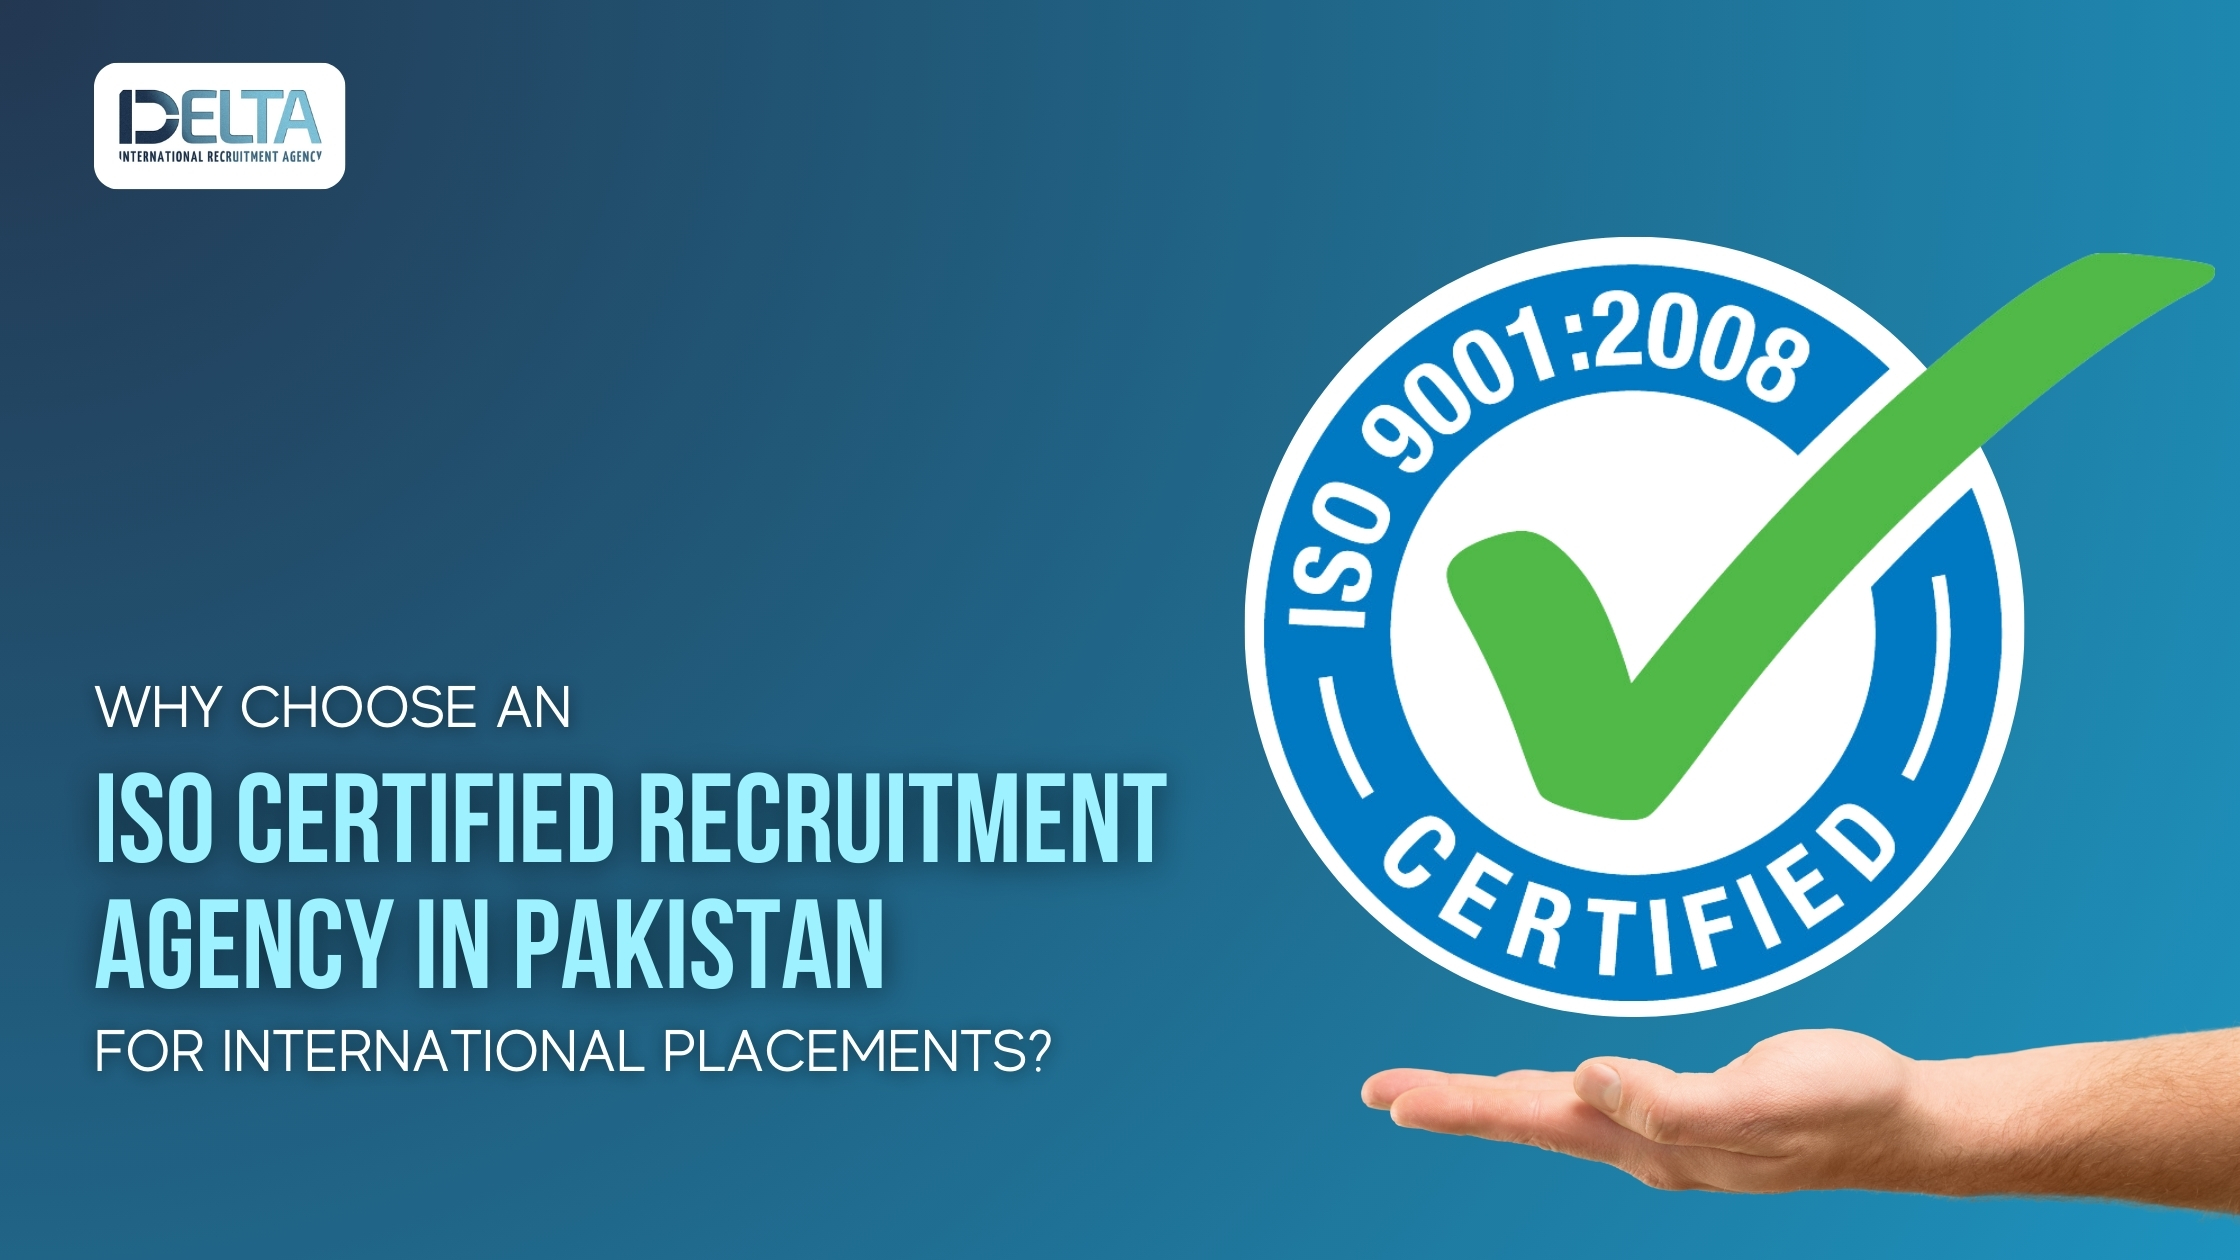 Why Choose an ISO Certified Recruitment Agency in Pakistan for International Placements?